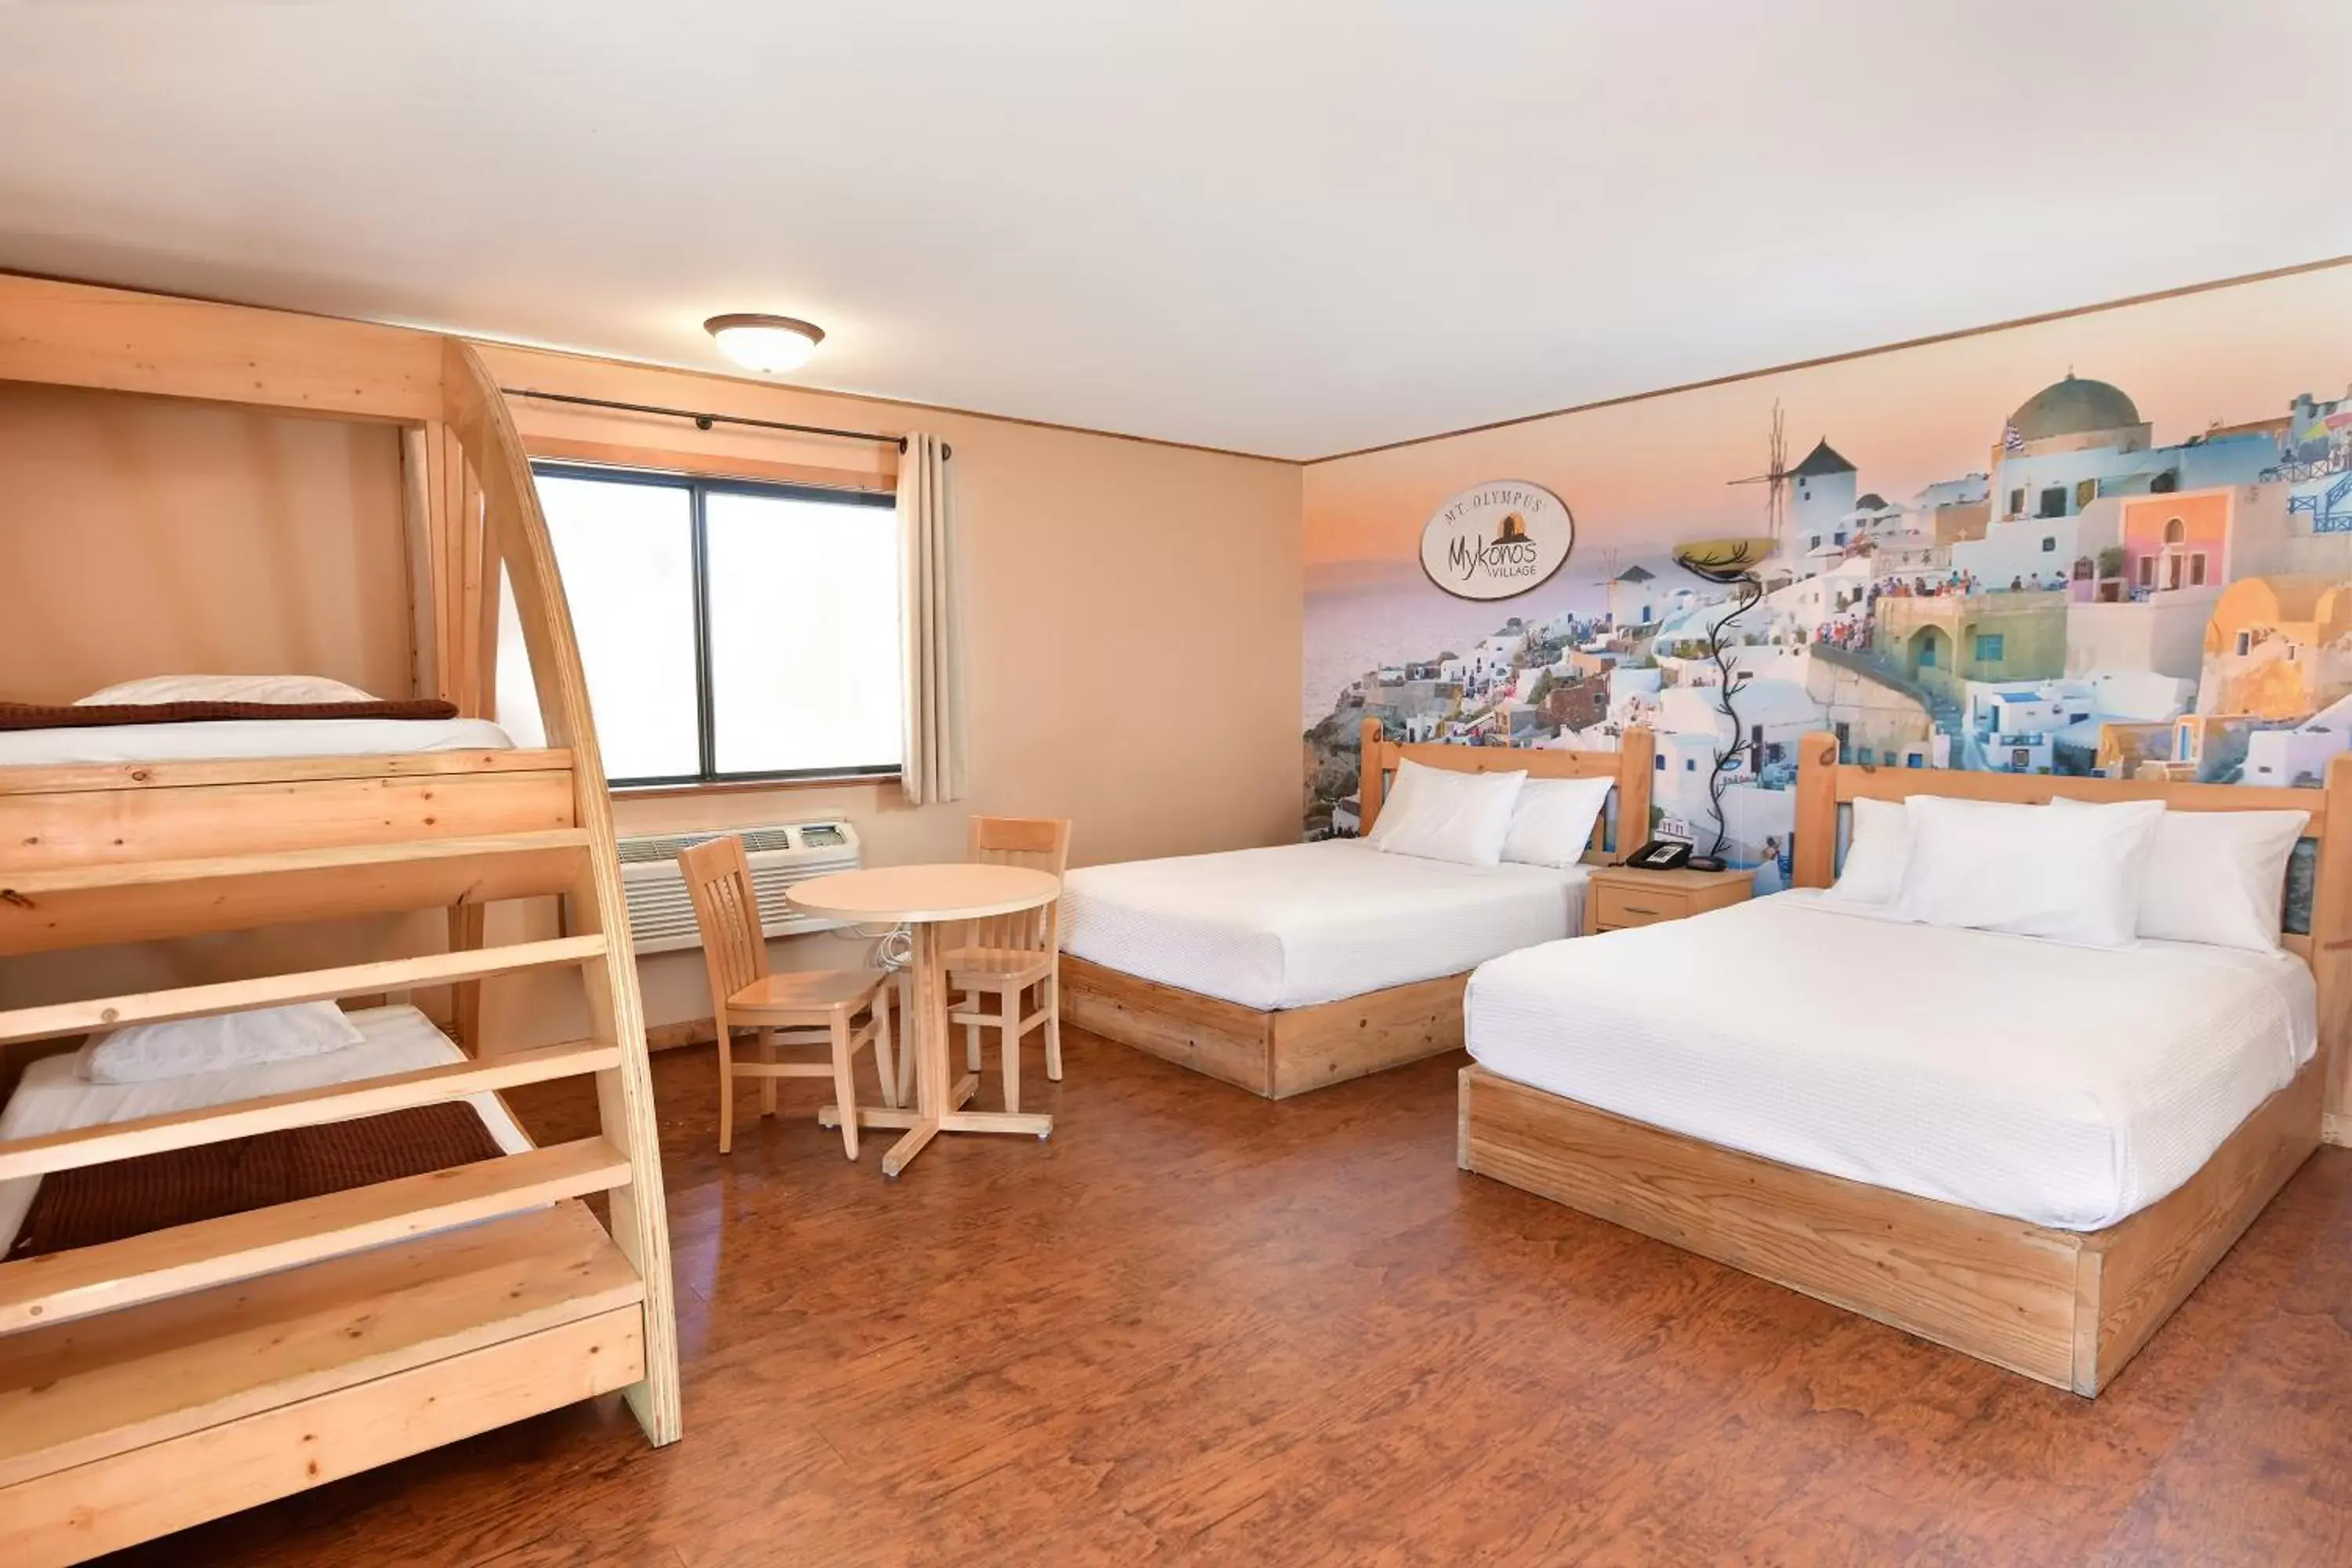 bunk bed in MT. OLYMPUS WATER PARK AND THEME PARK RESORT